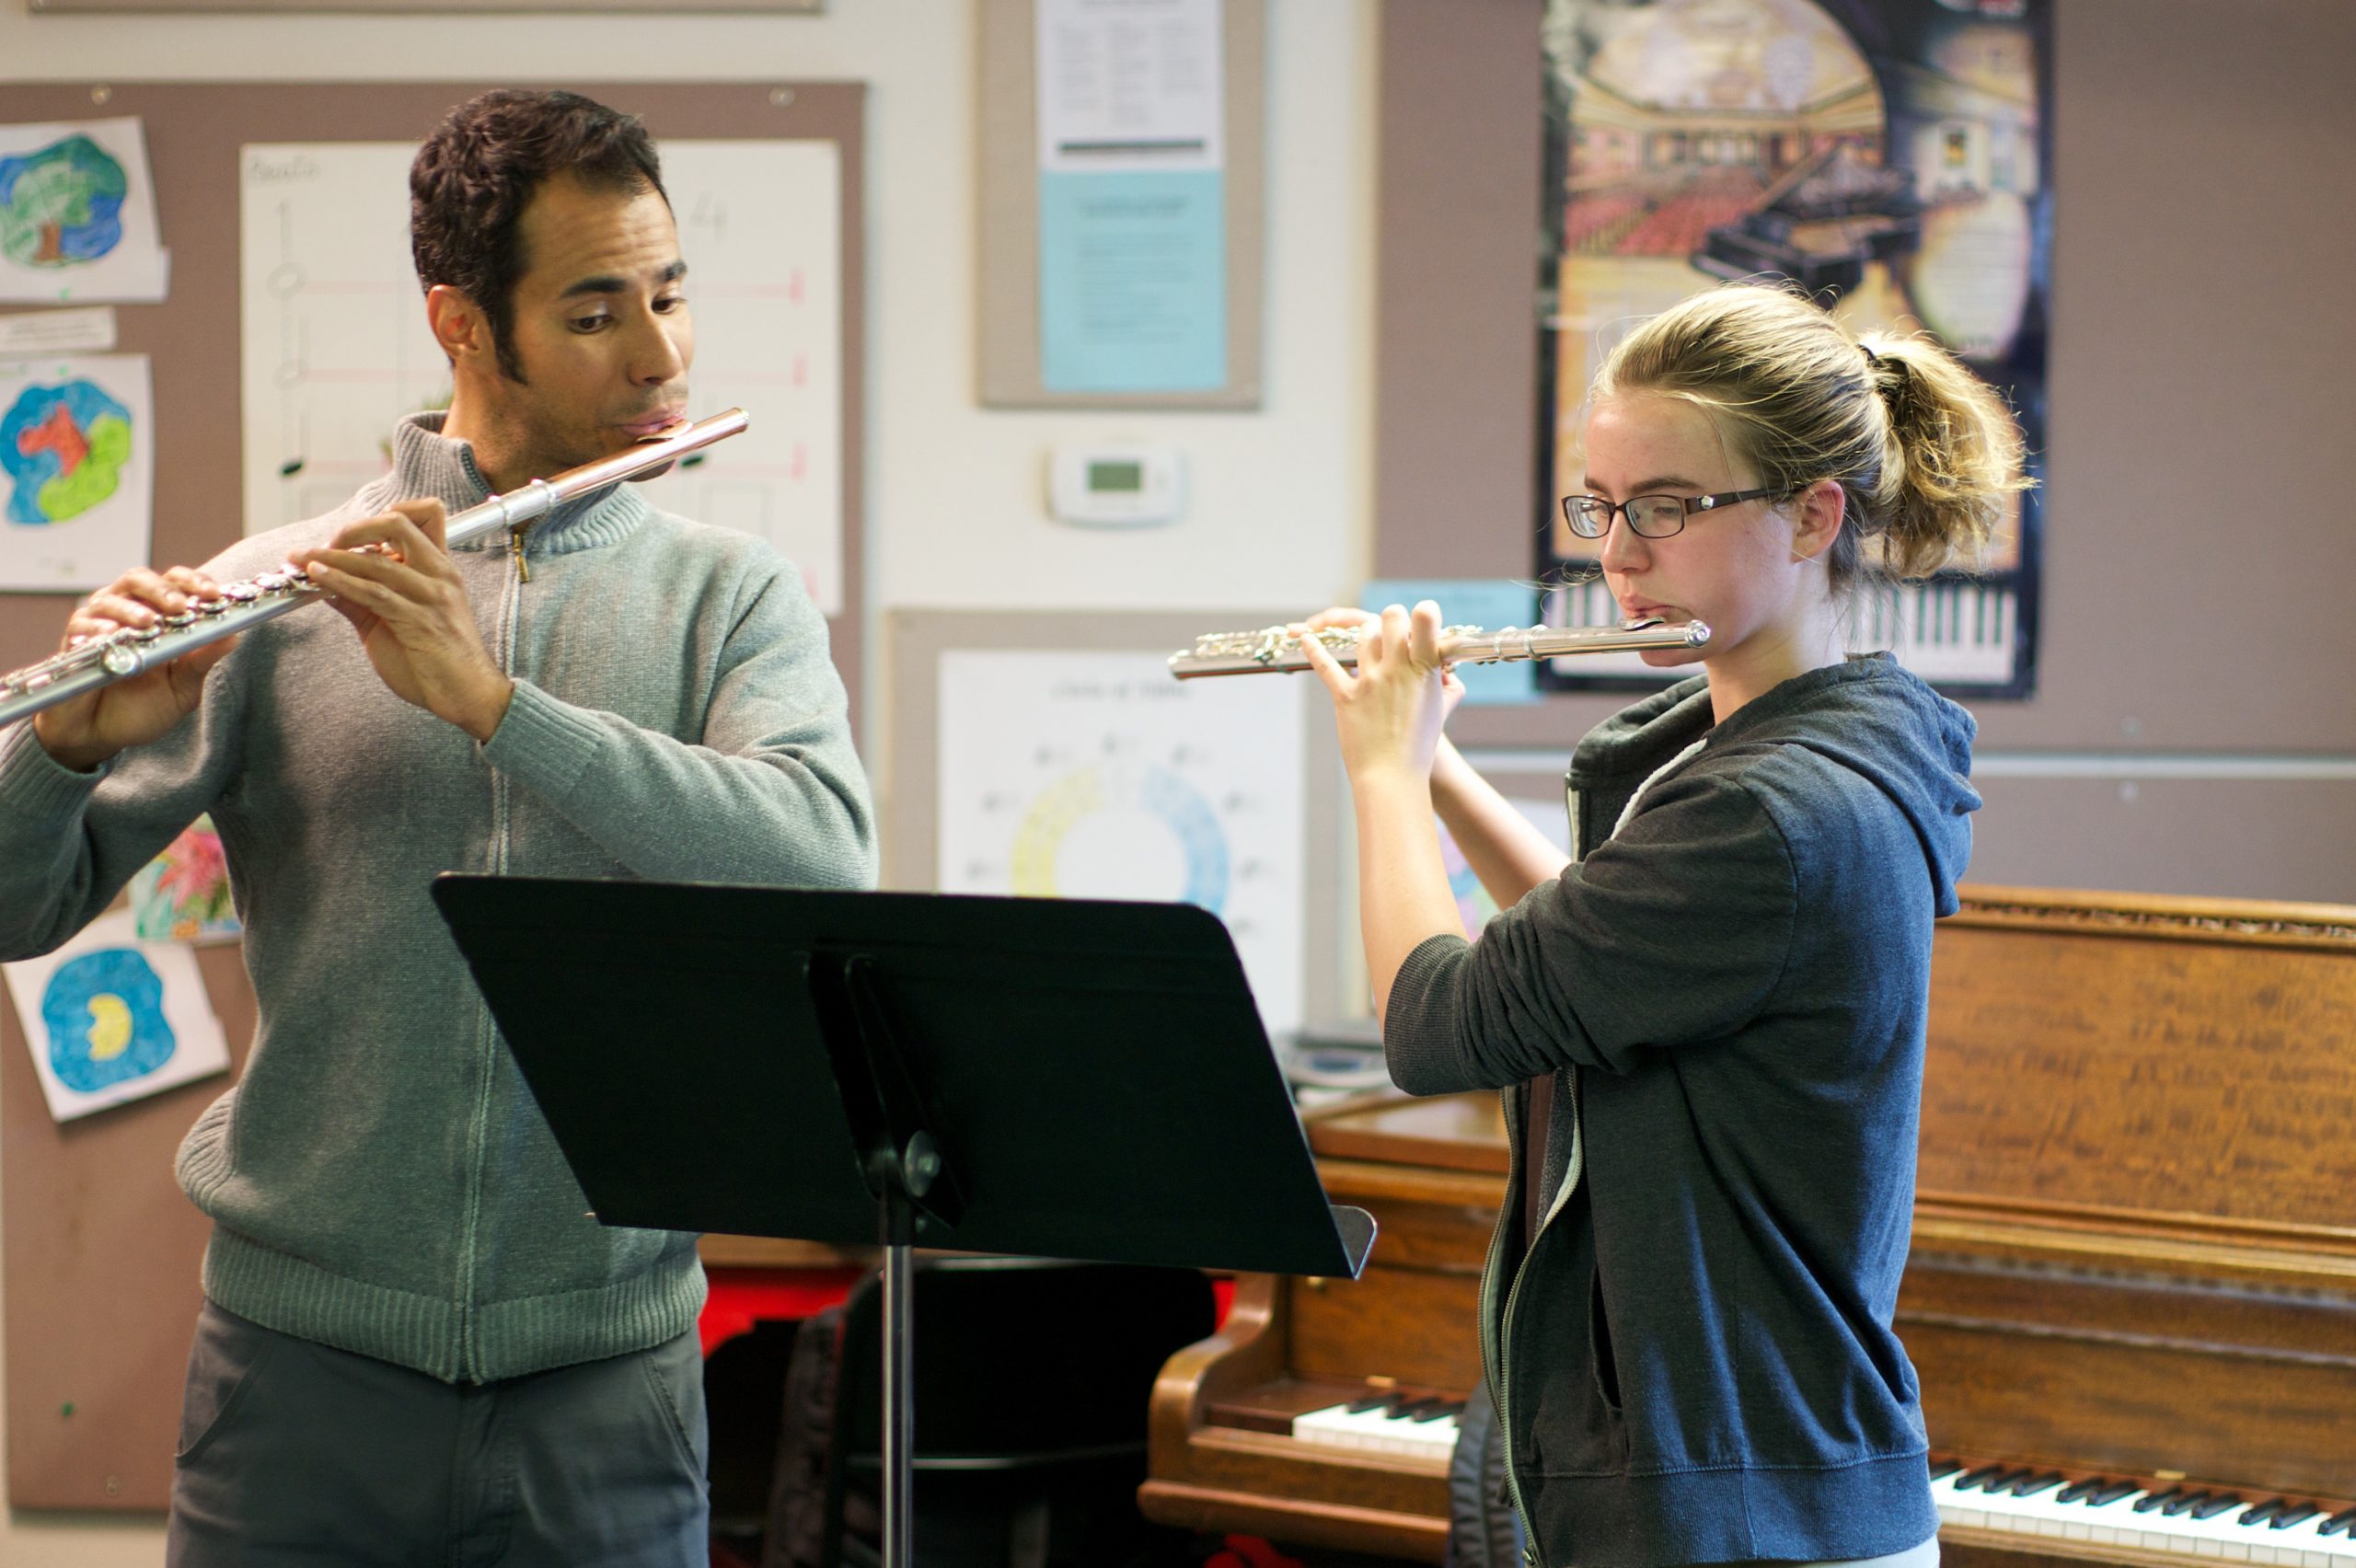 Flute lessons - two people playing the flute, student and teacher